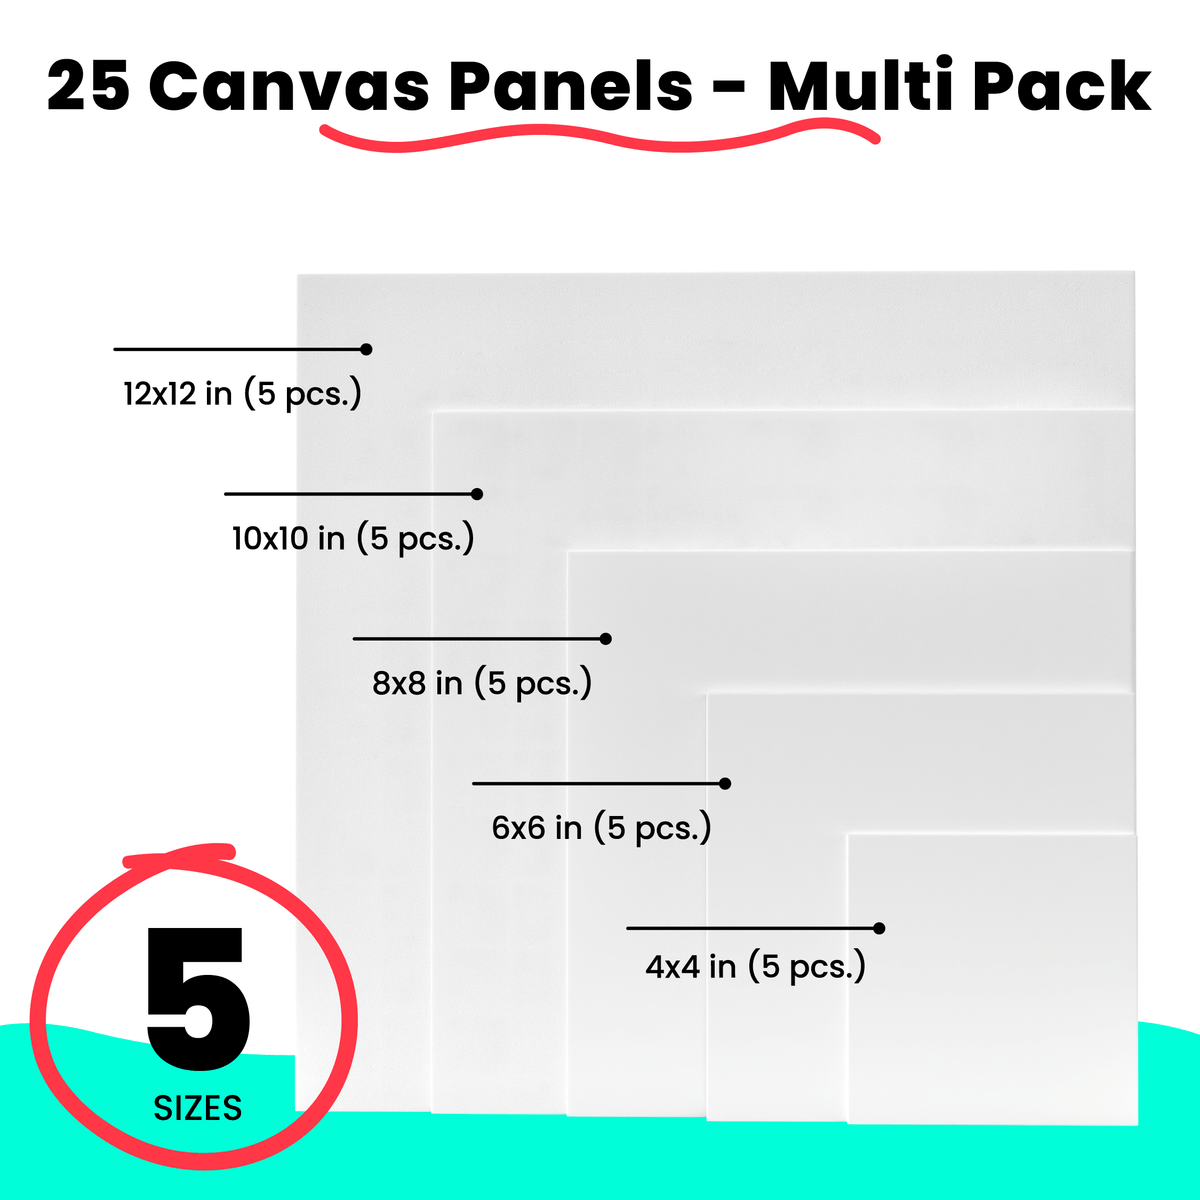 Painting Canvas Panels | 4x4, 6x6, 8x8, 10x10, 12x12 inch (5 Each, 25 Pack) 